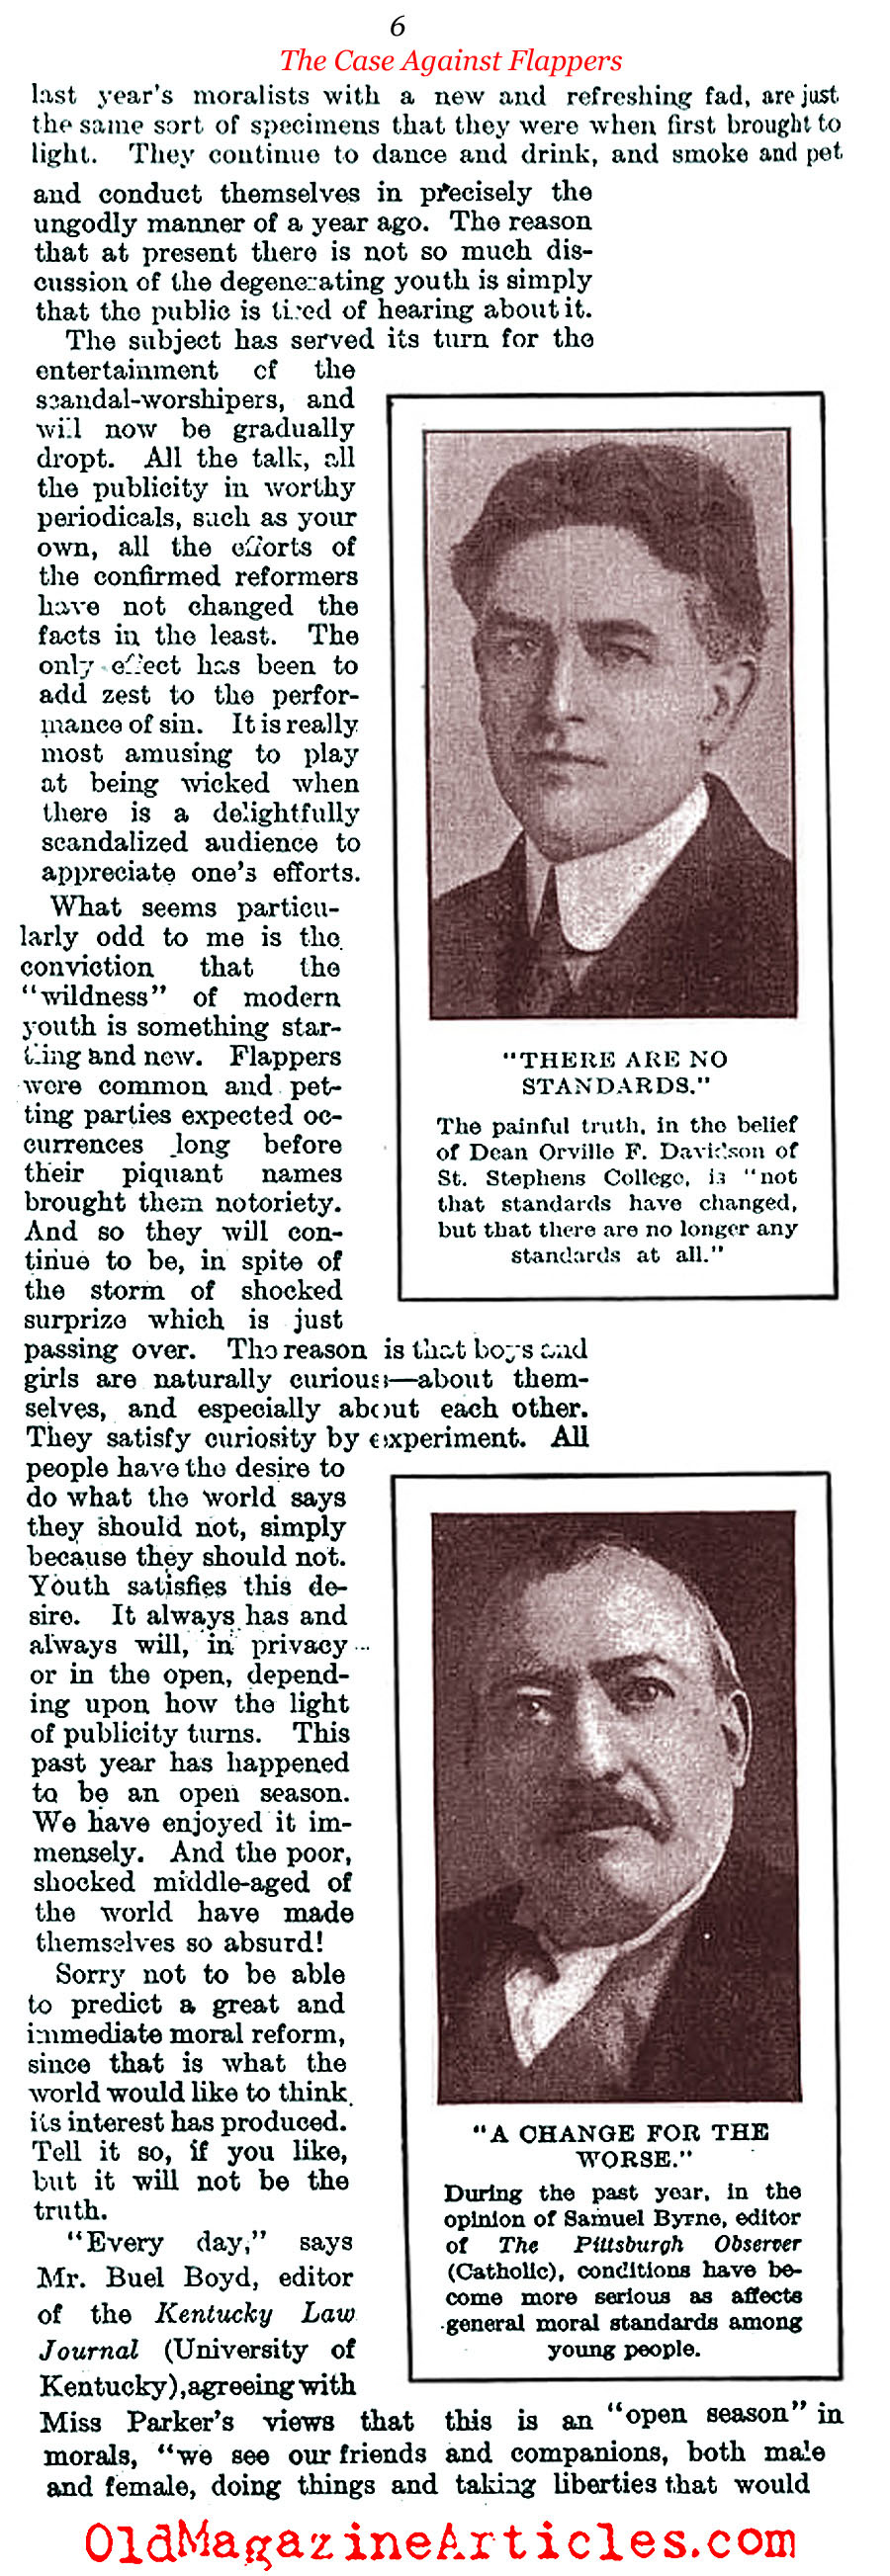 The Case Against Flappers (Literary Digest, 1922)